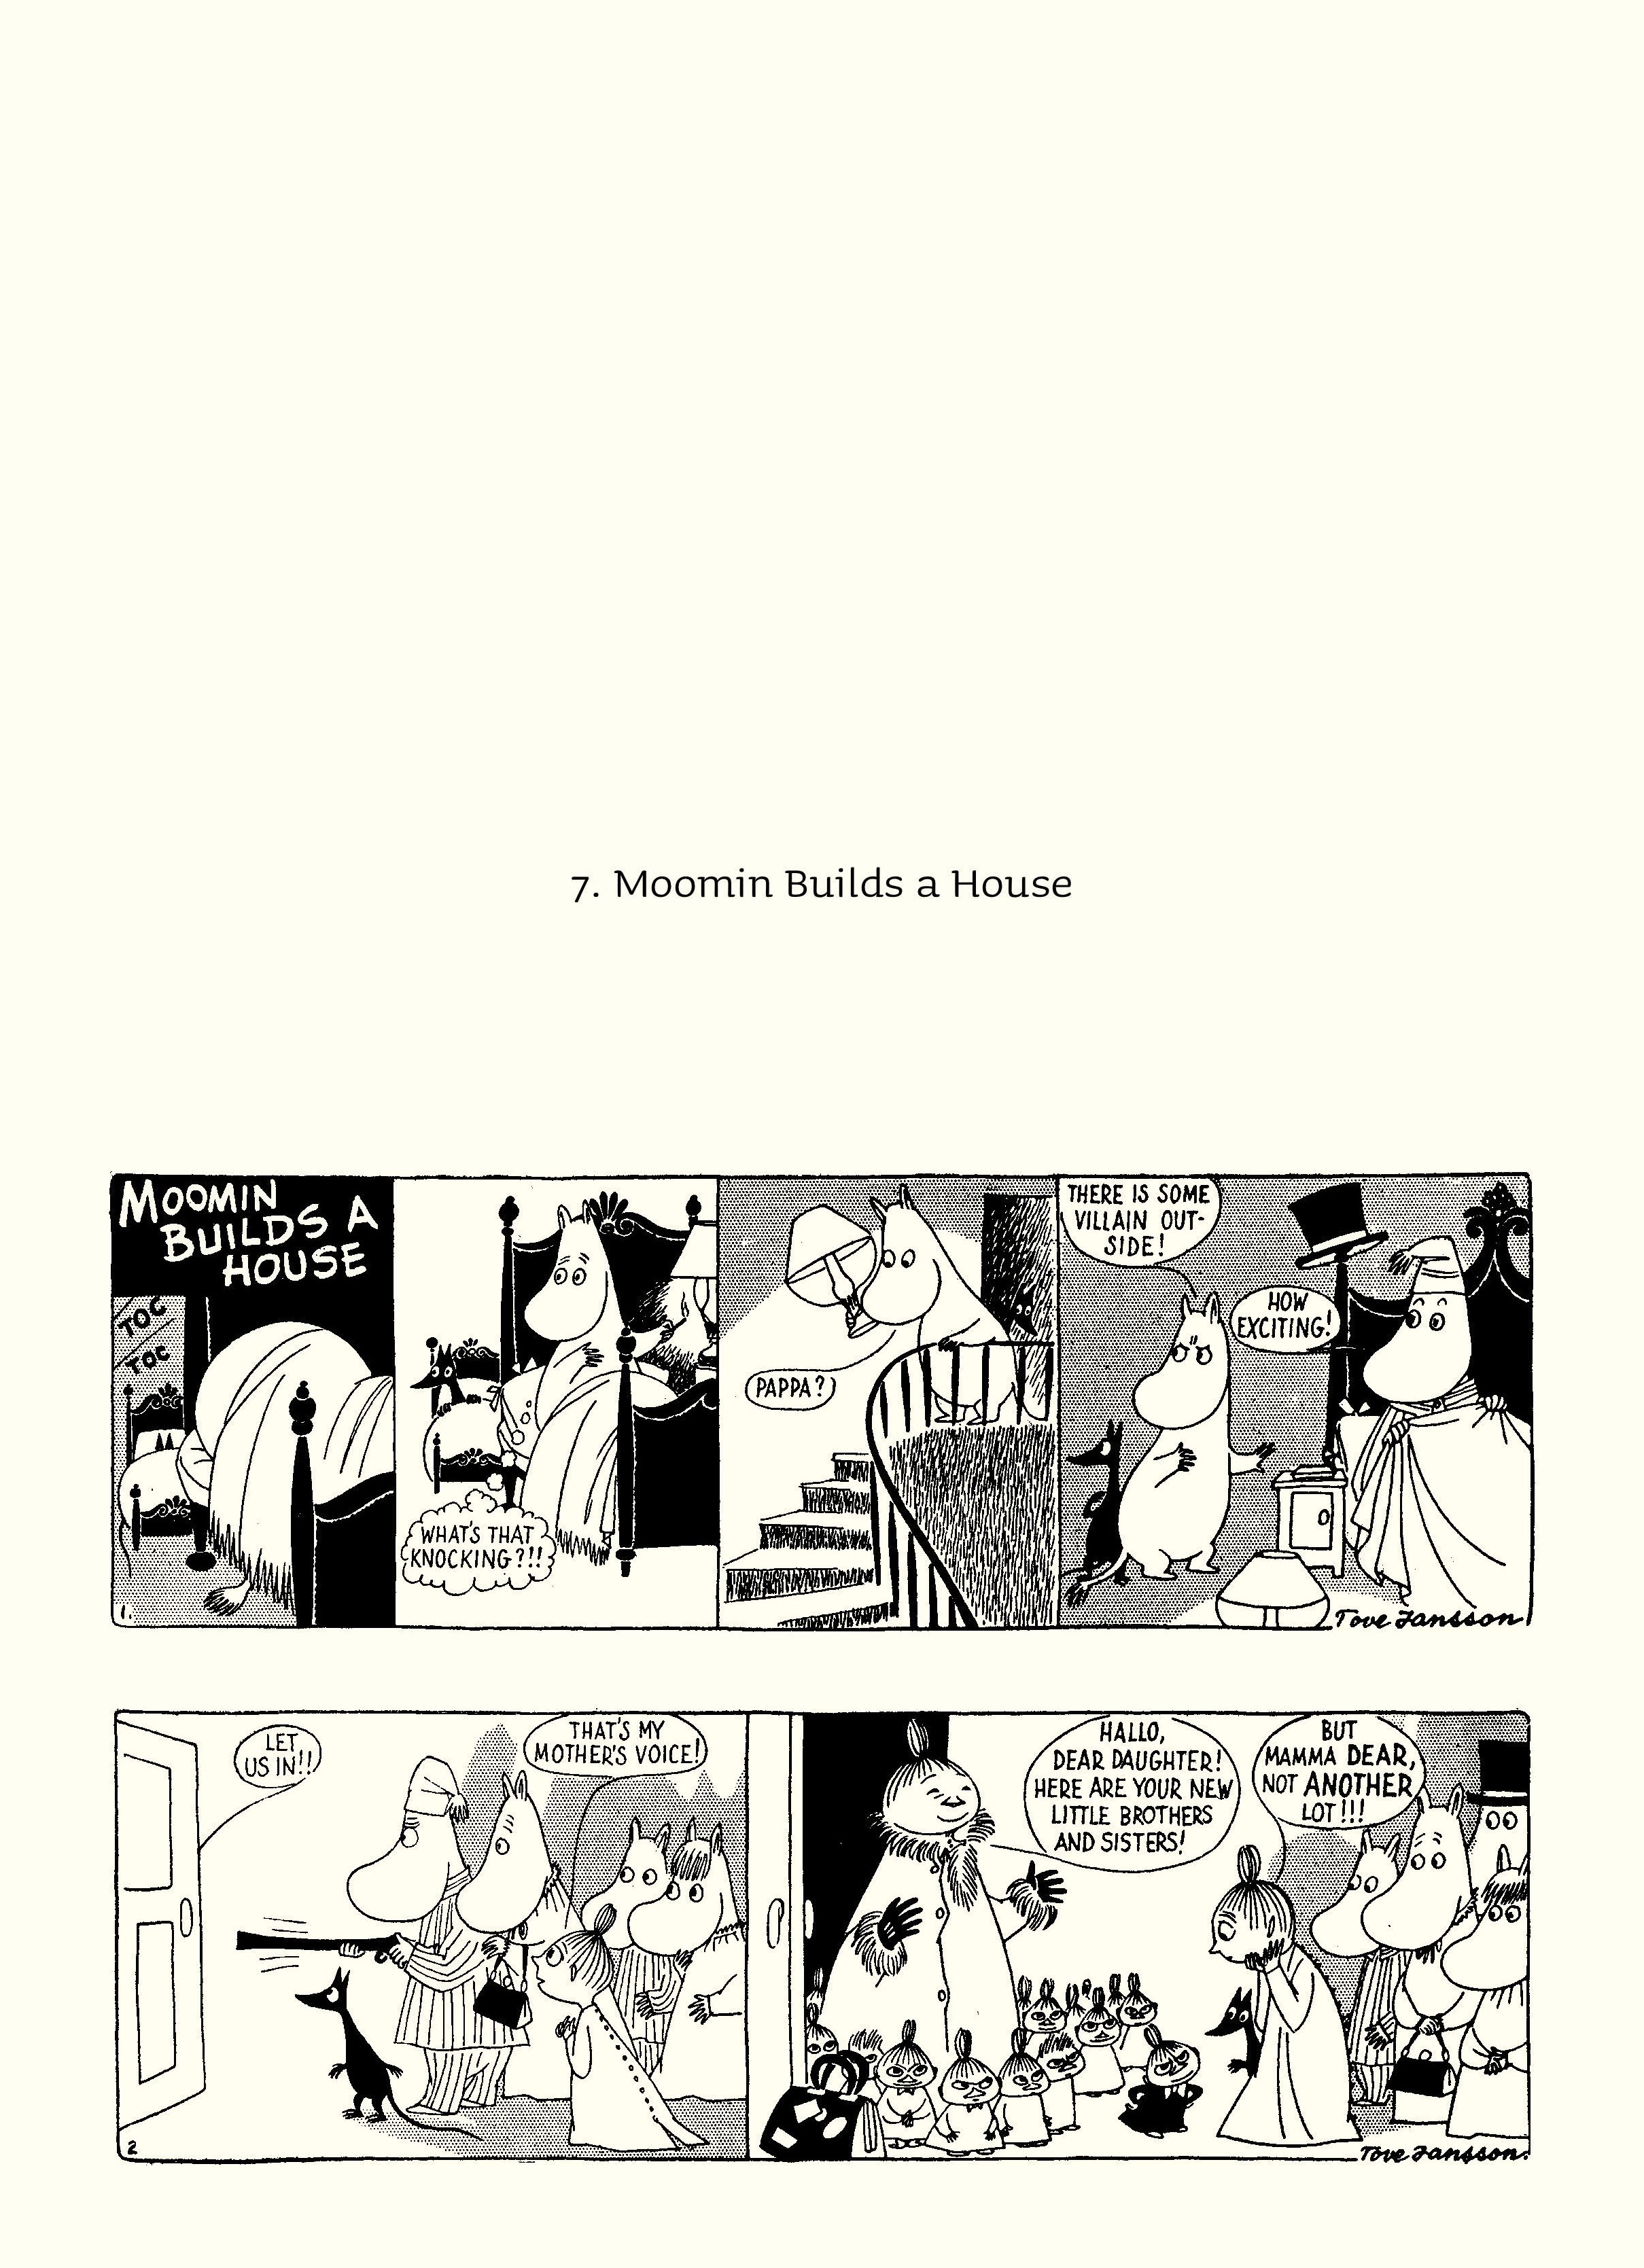 Read online Moomin: The Complete Tove Jansson Comic Strip comic -  Issue # TPB 2 - 48